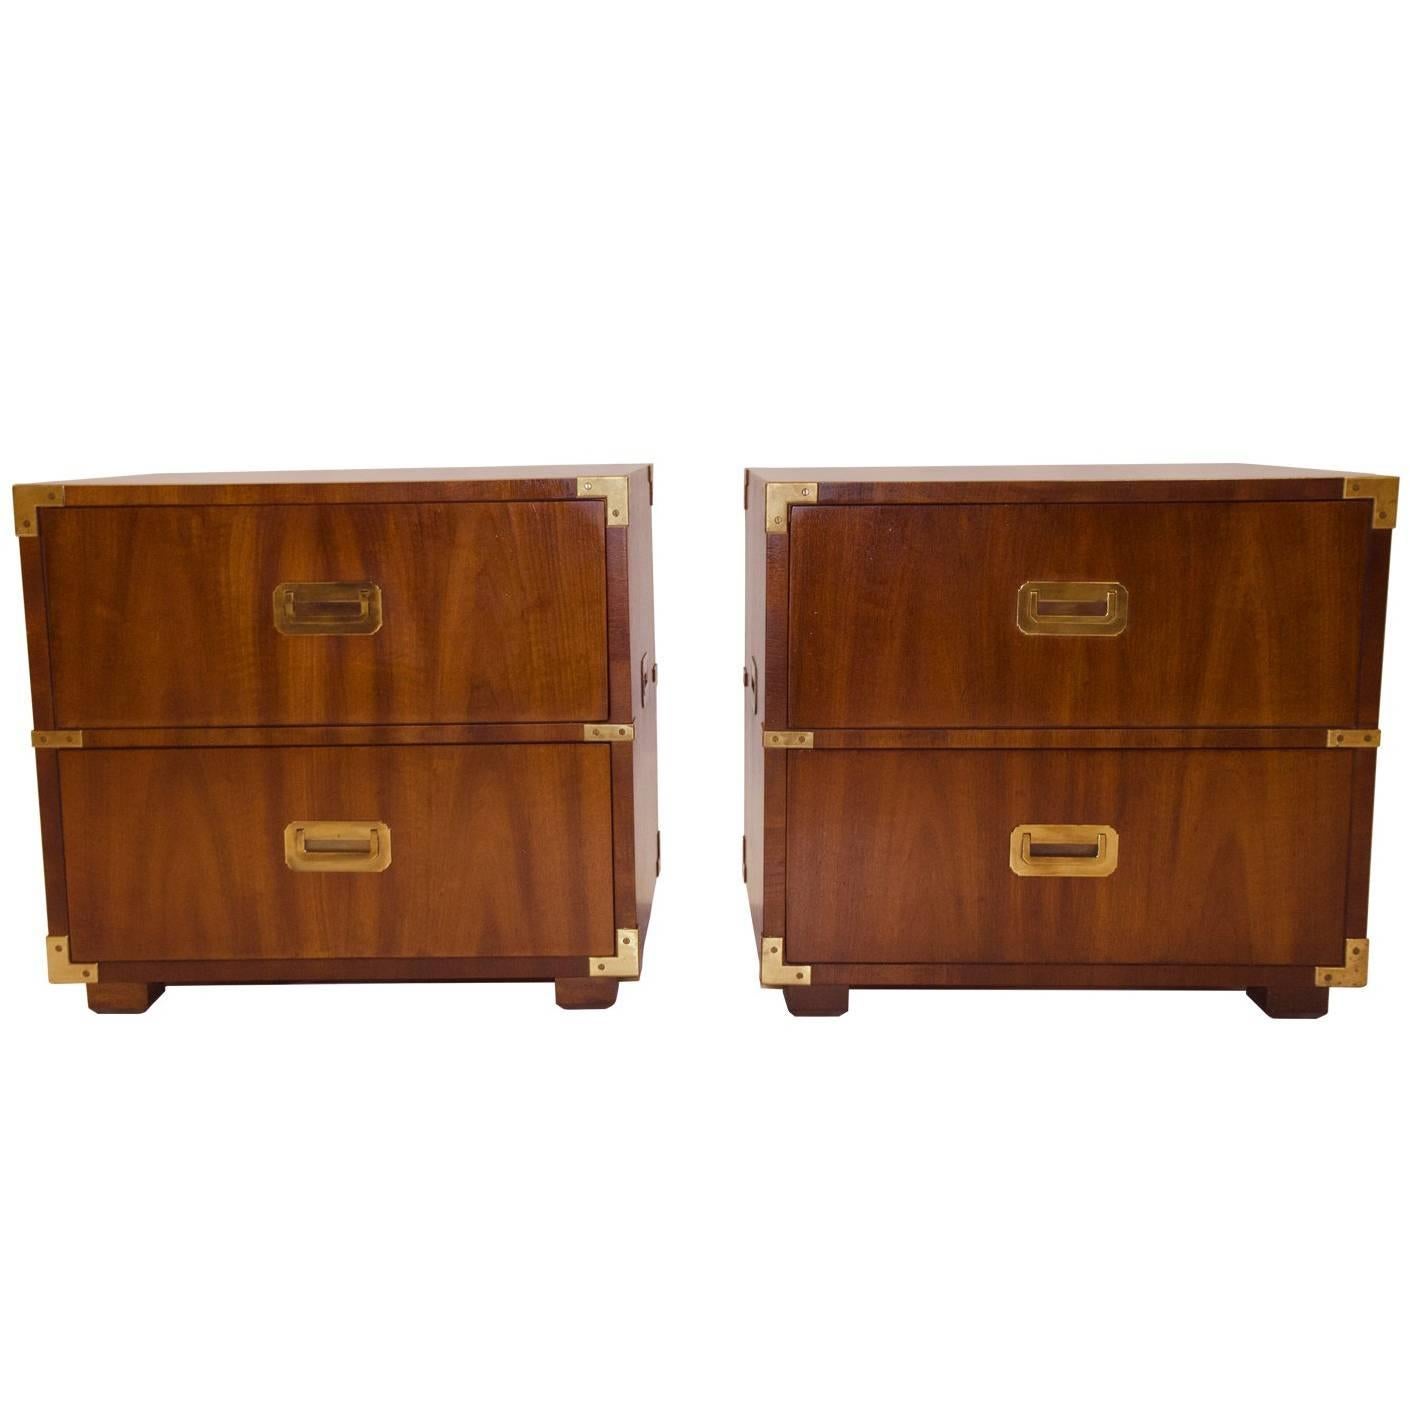 Pair of Campaign Nightstands in Walnut and Brass by Henredon